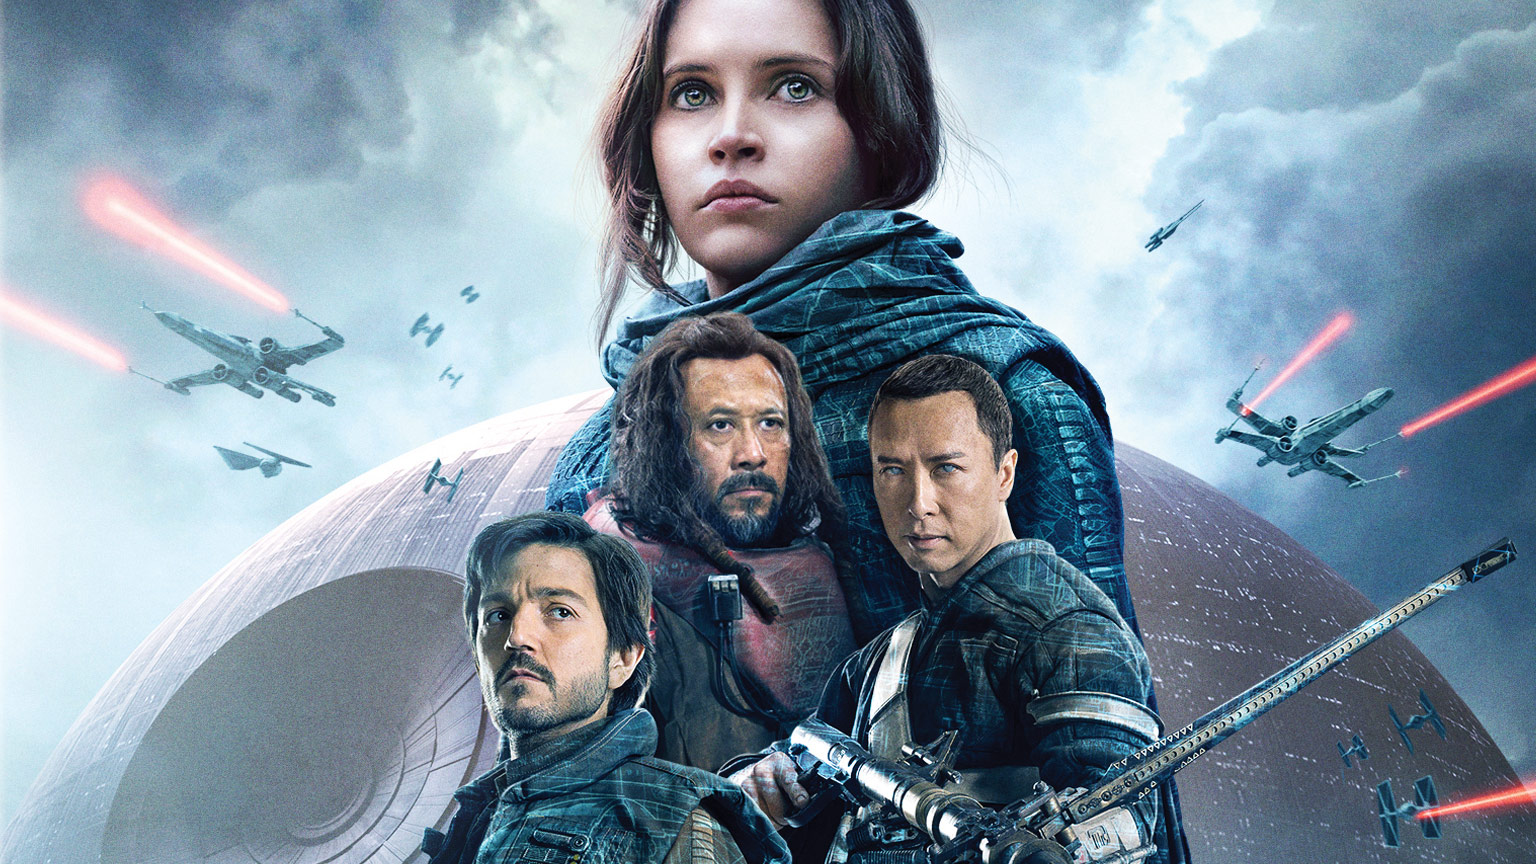 Film - Rogue One: A Star Wars Story - The DreamCage